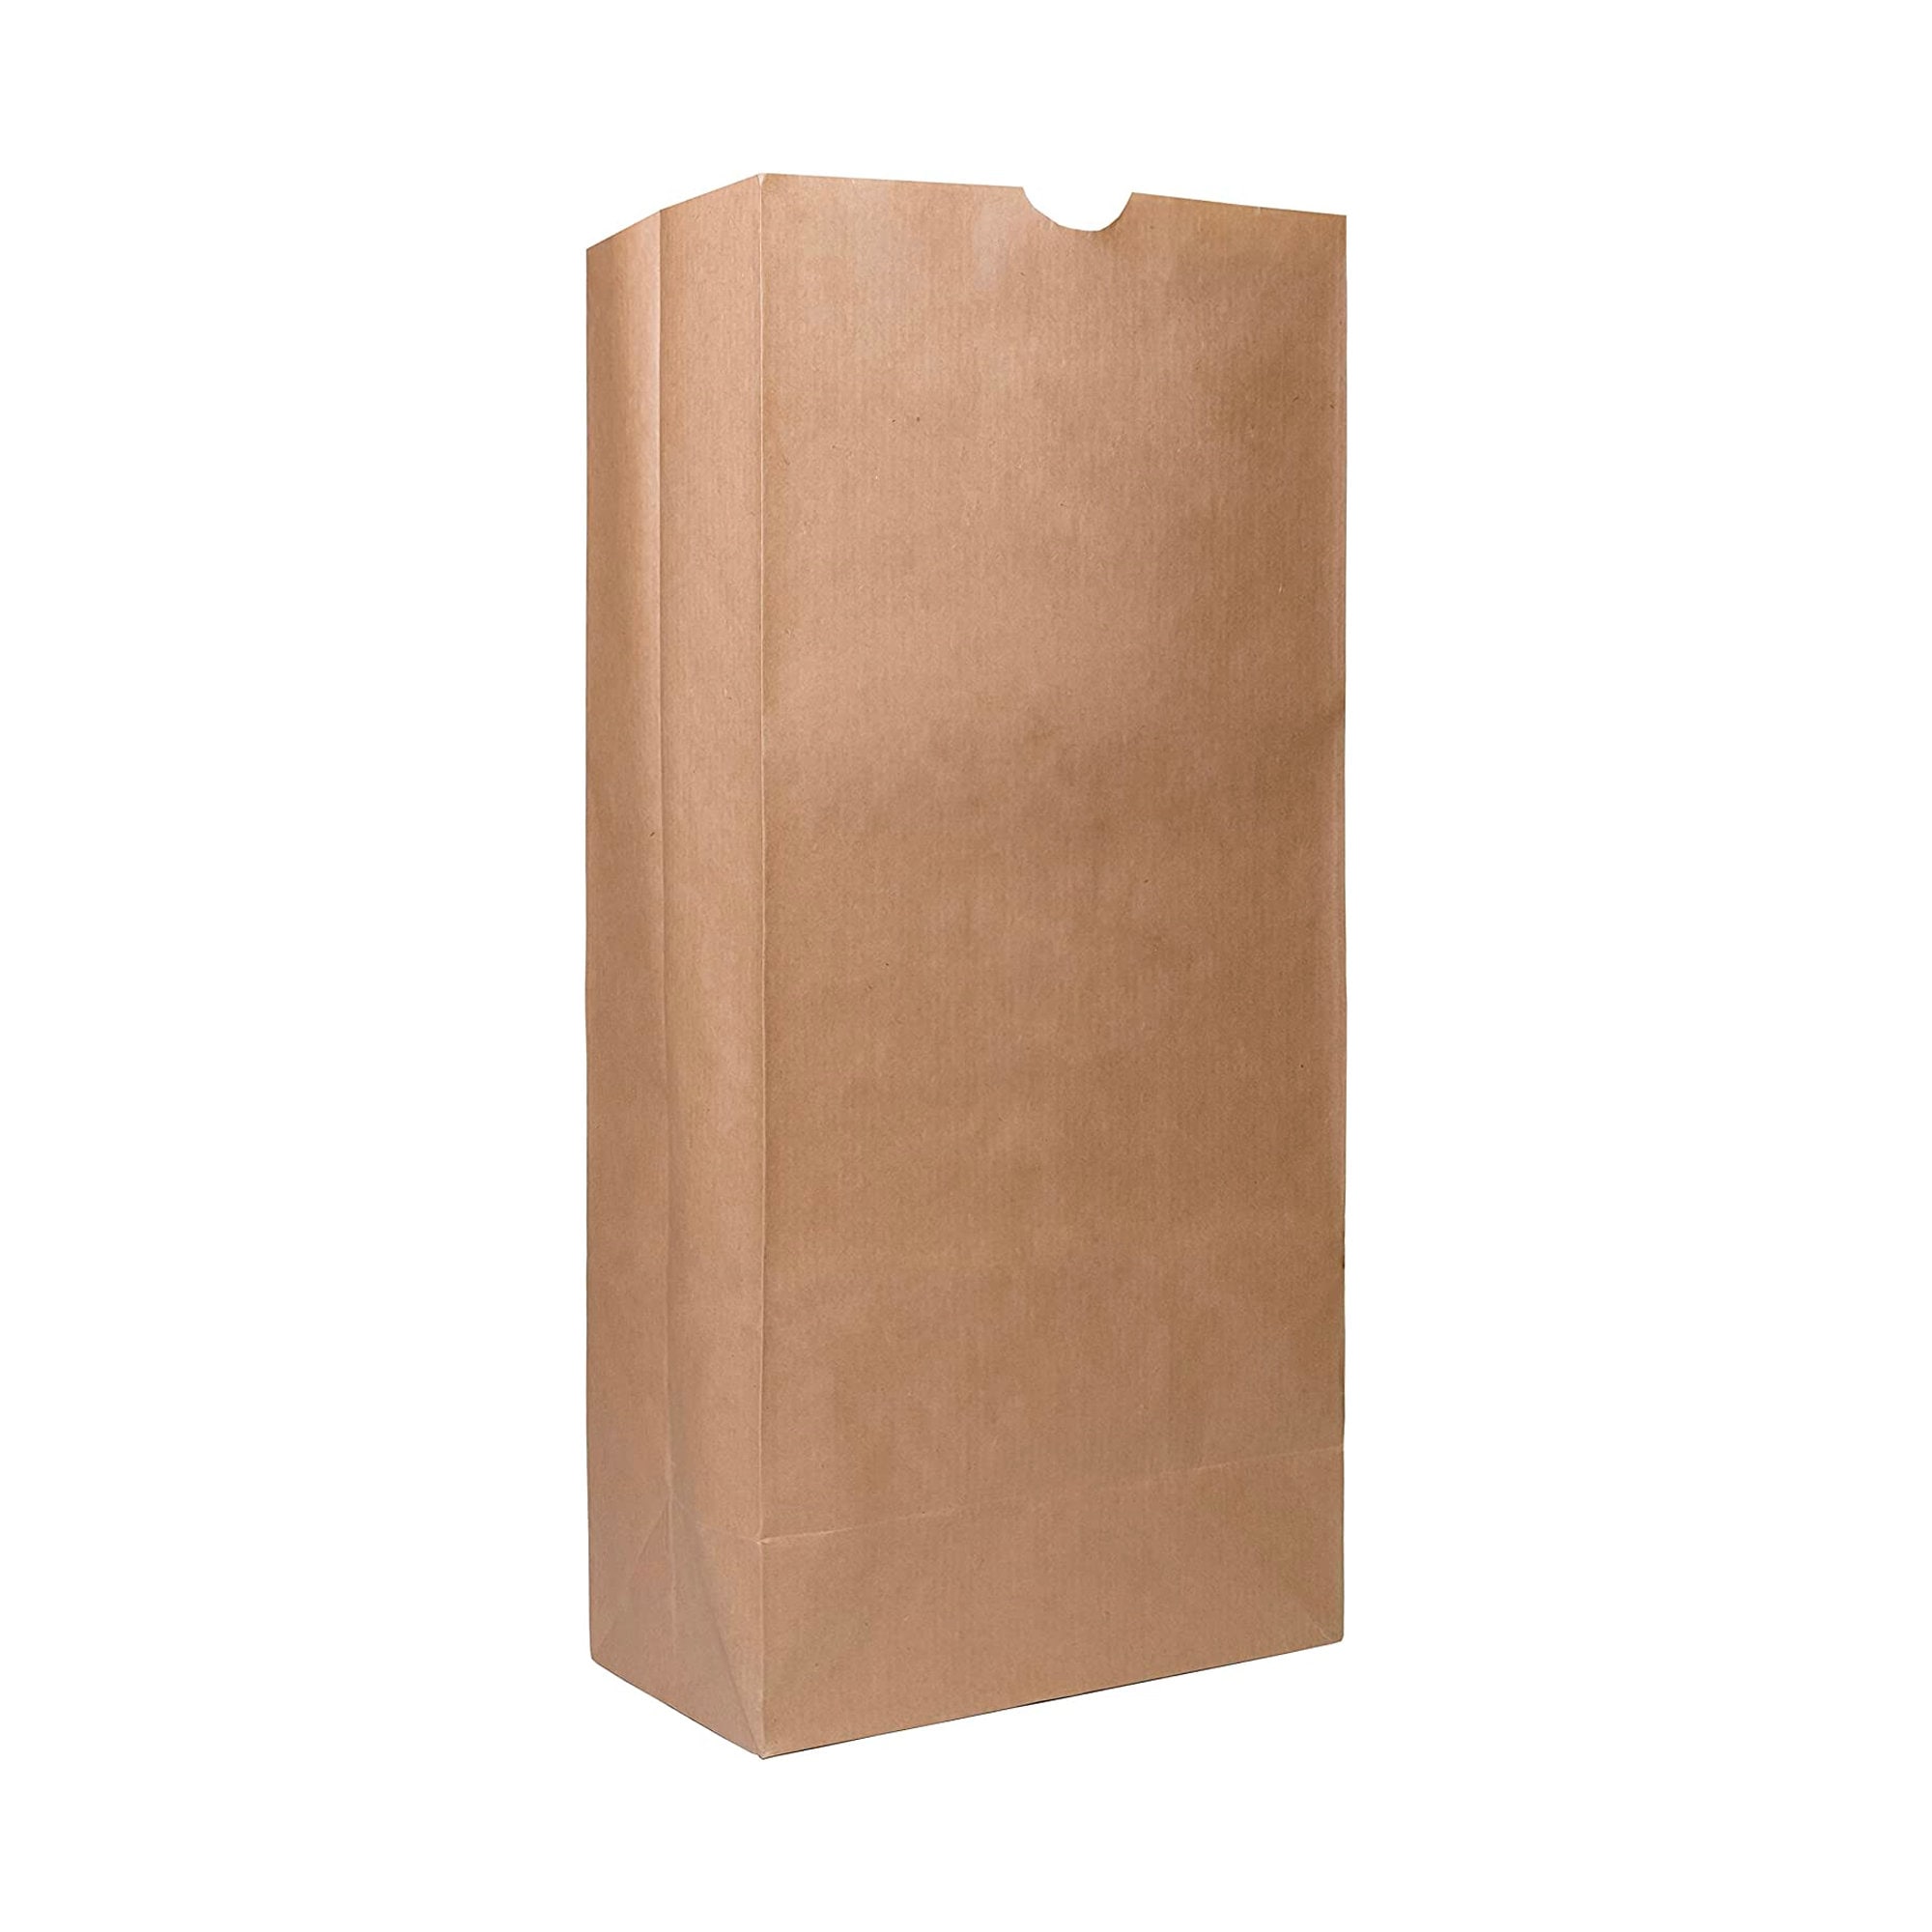 5 Kraft Paper Gift Bags With Handles Size Rose 5 1/2 X 3 1/4 X 8 3